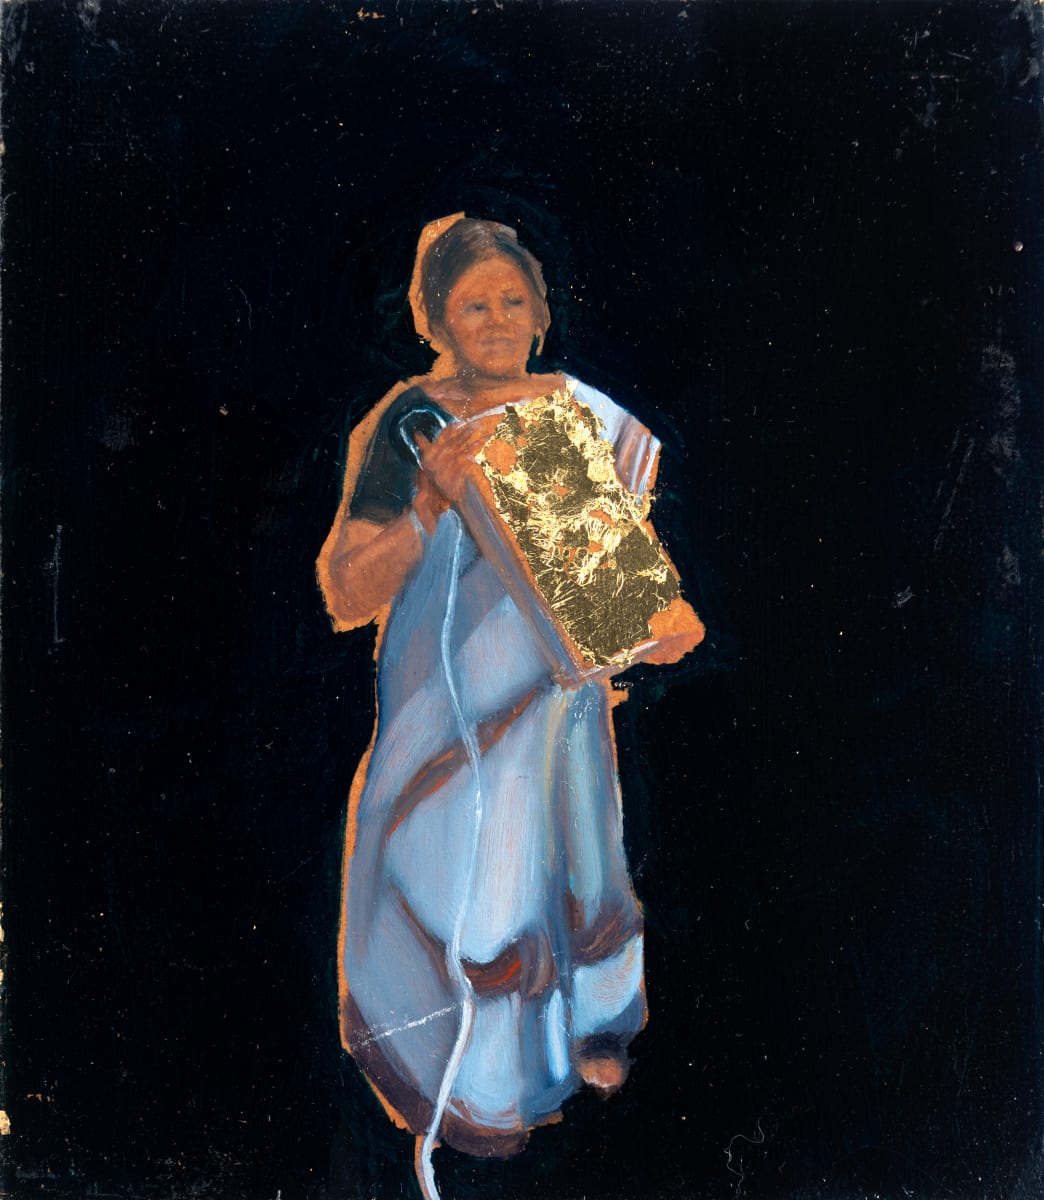 The woman’s vote by Michelle Boyle  Image: 35000 rupees 